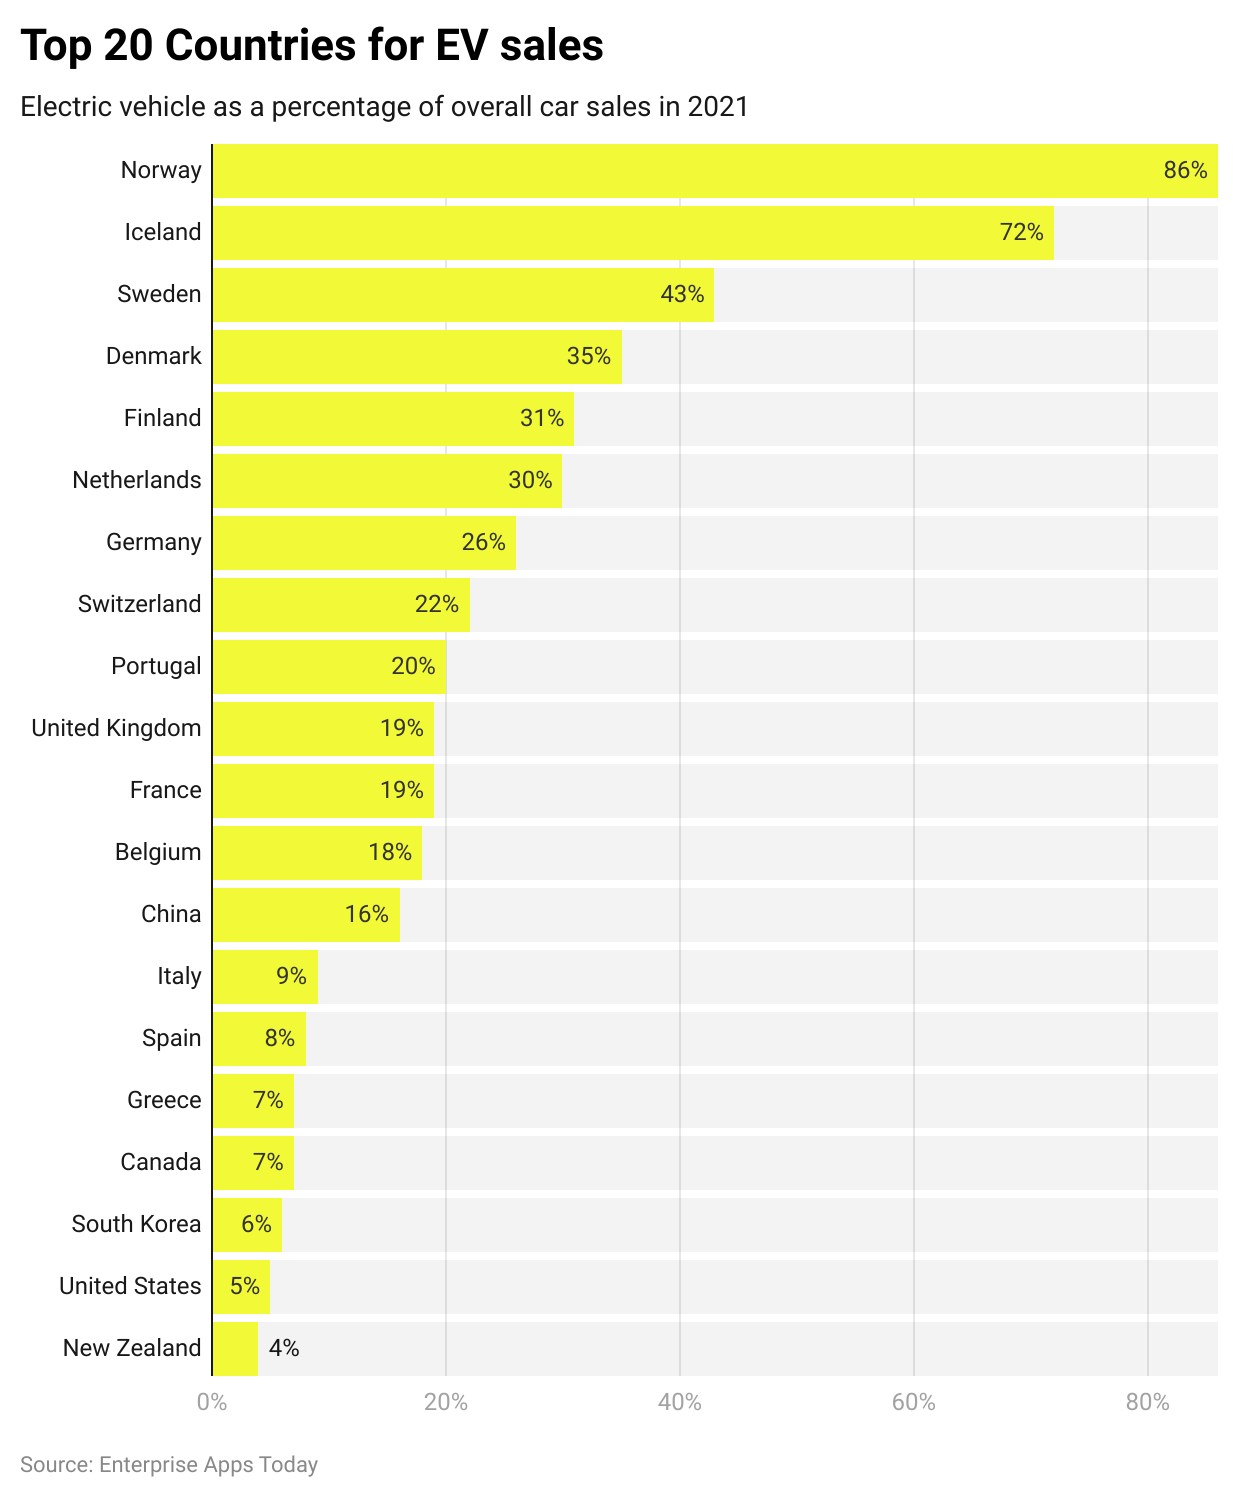 Top 20 Countries for EV sales